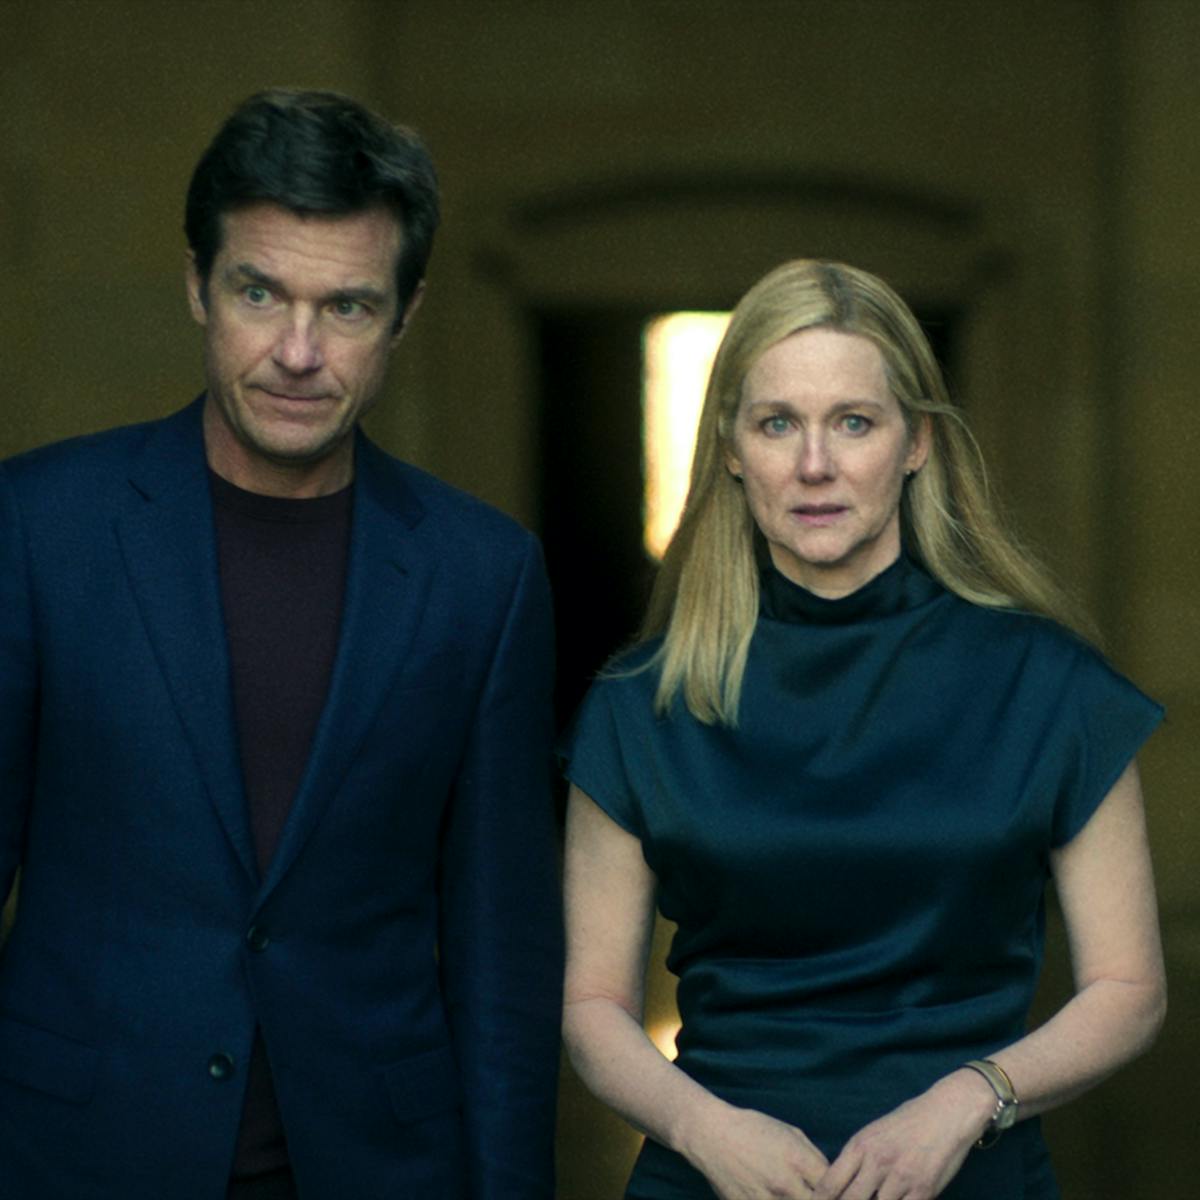 Marty Bryde (Jason Bateman) and Wendy Bryde (Laura Linney) wear navy and look solemn.